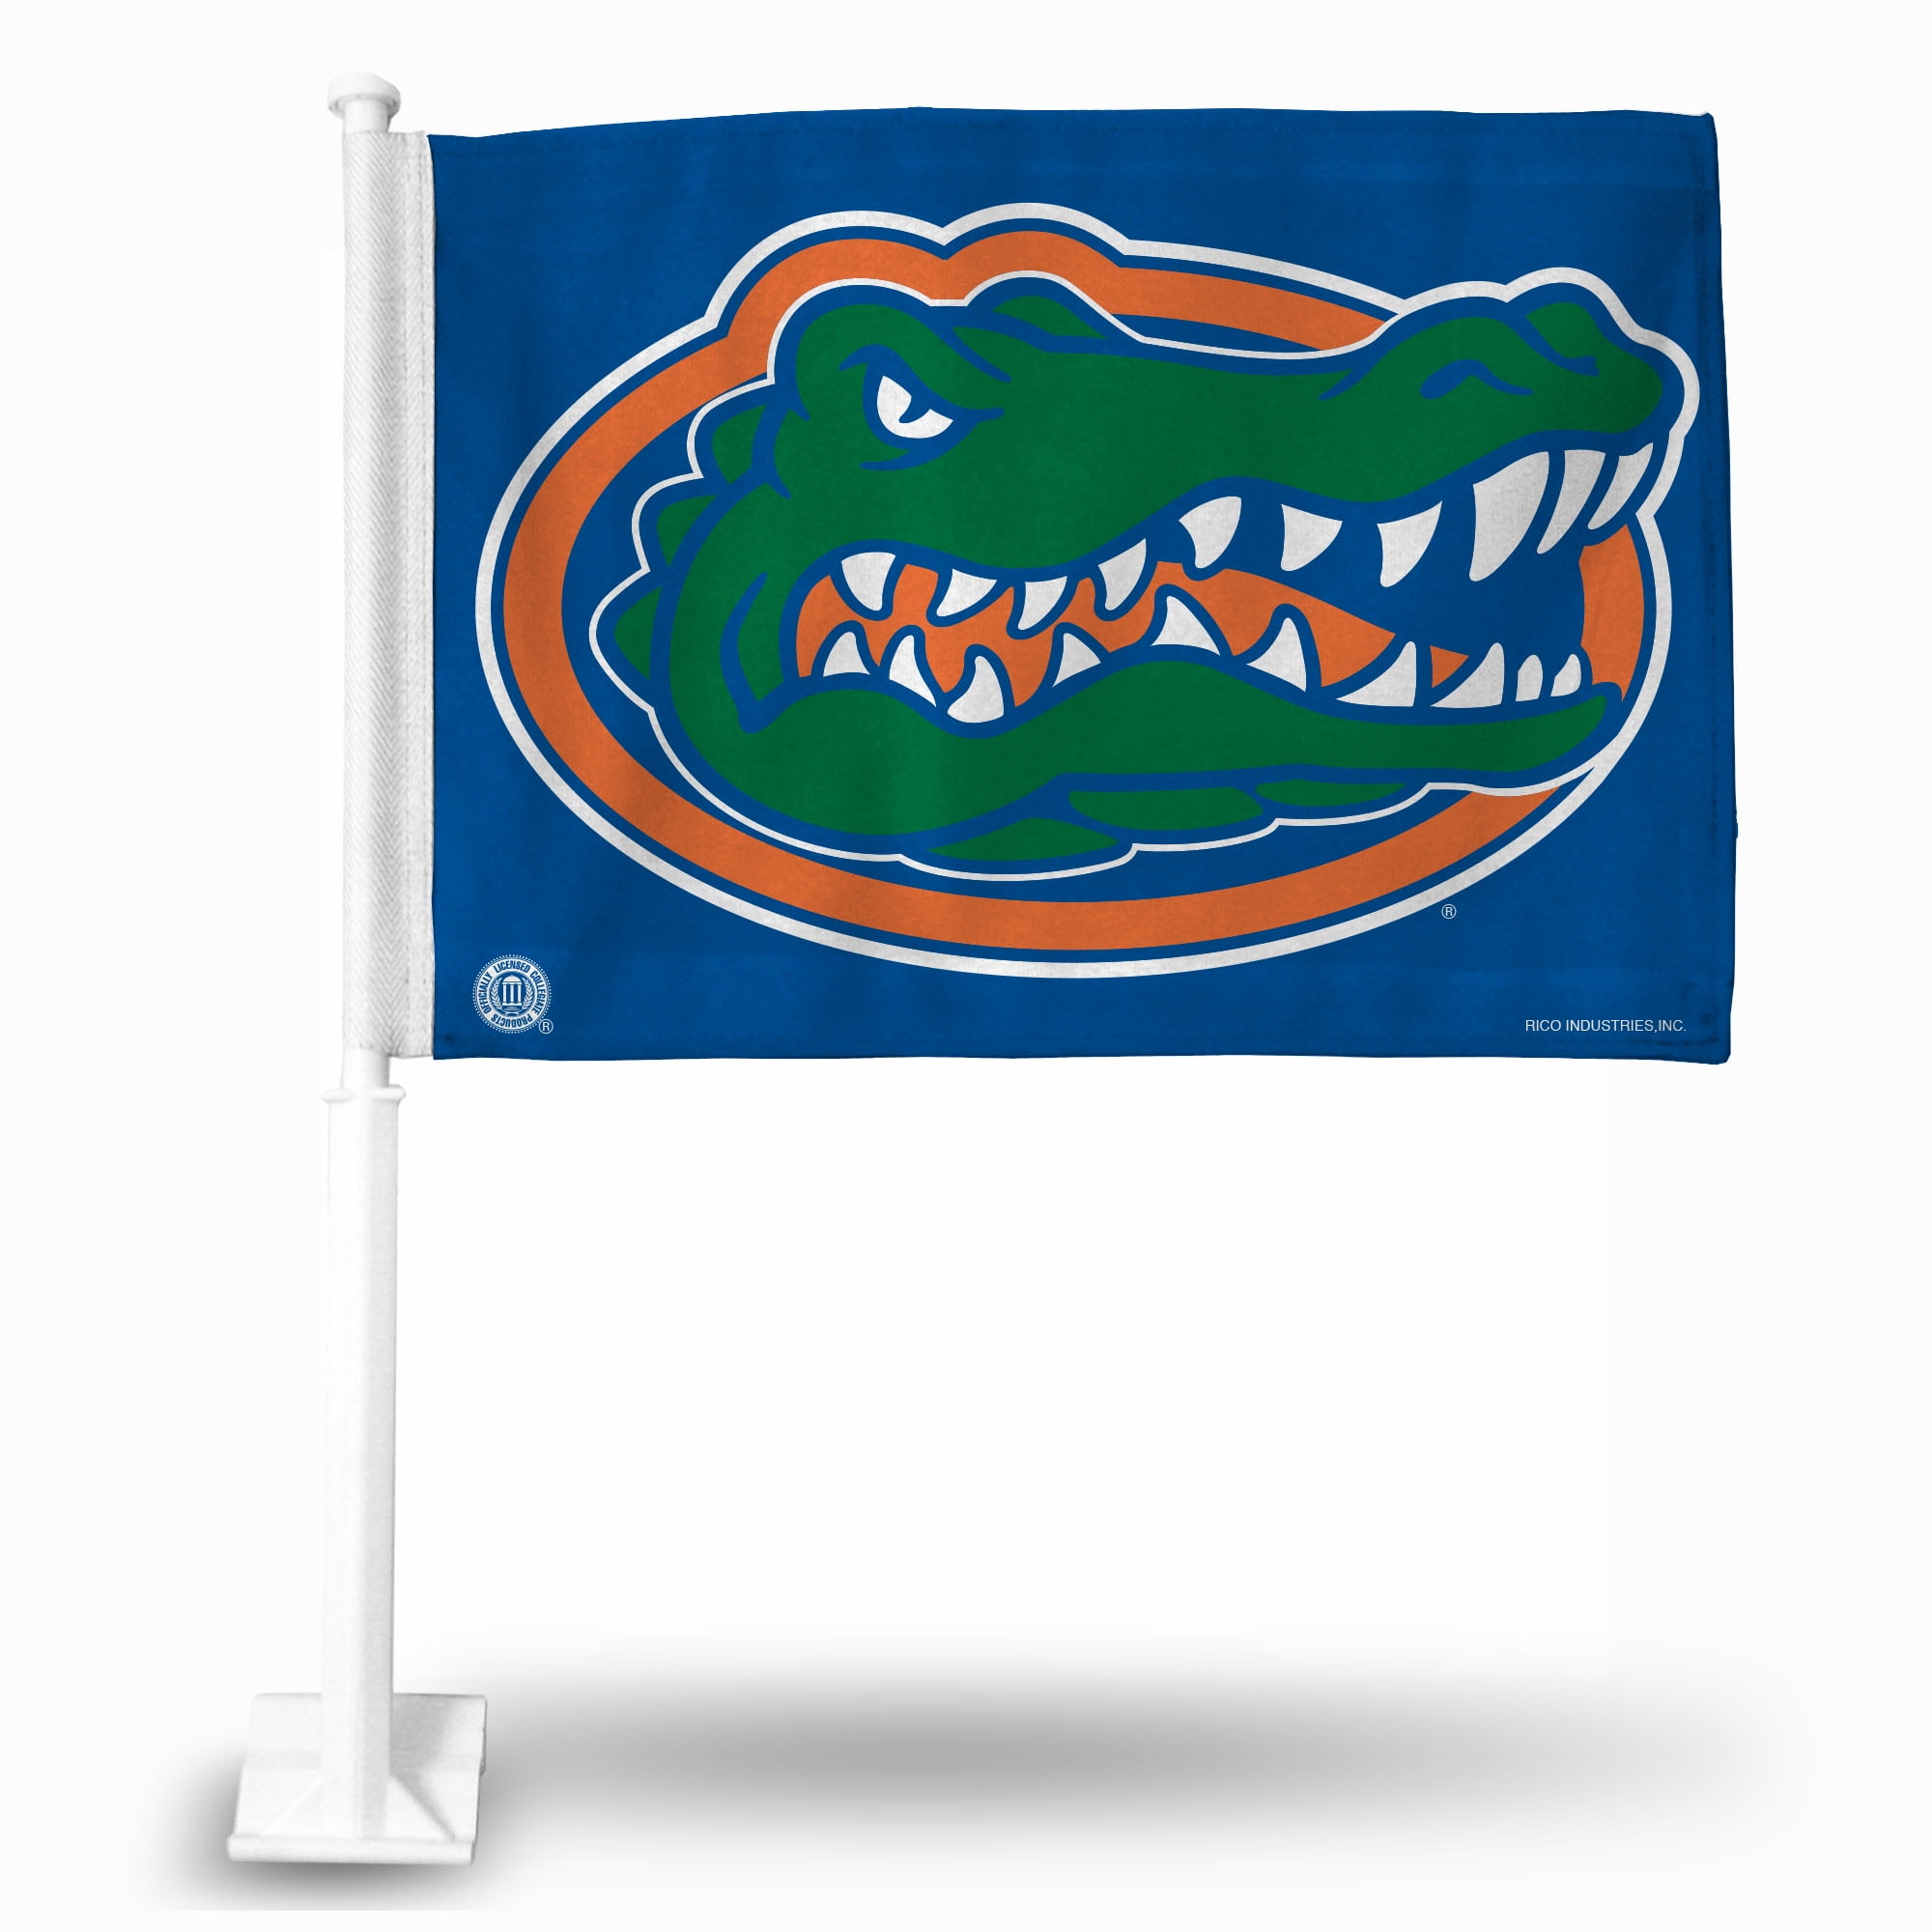 Rico Industries Florida Gators College Double Sided Car Flag - 16 x 19 -  Strong Pole that Hooks Onto Car/Truck/Automobile 